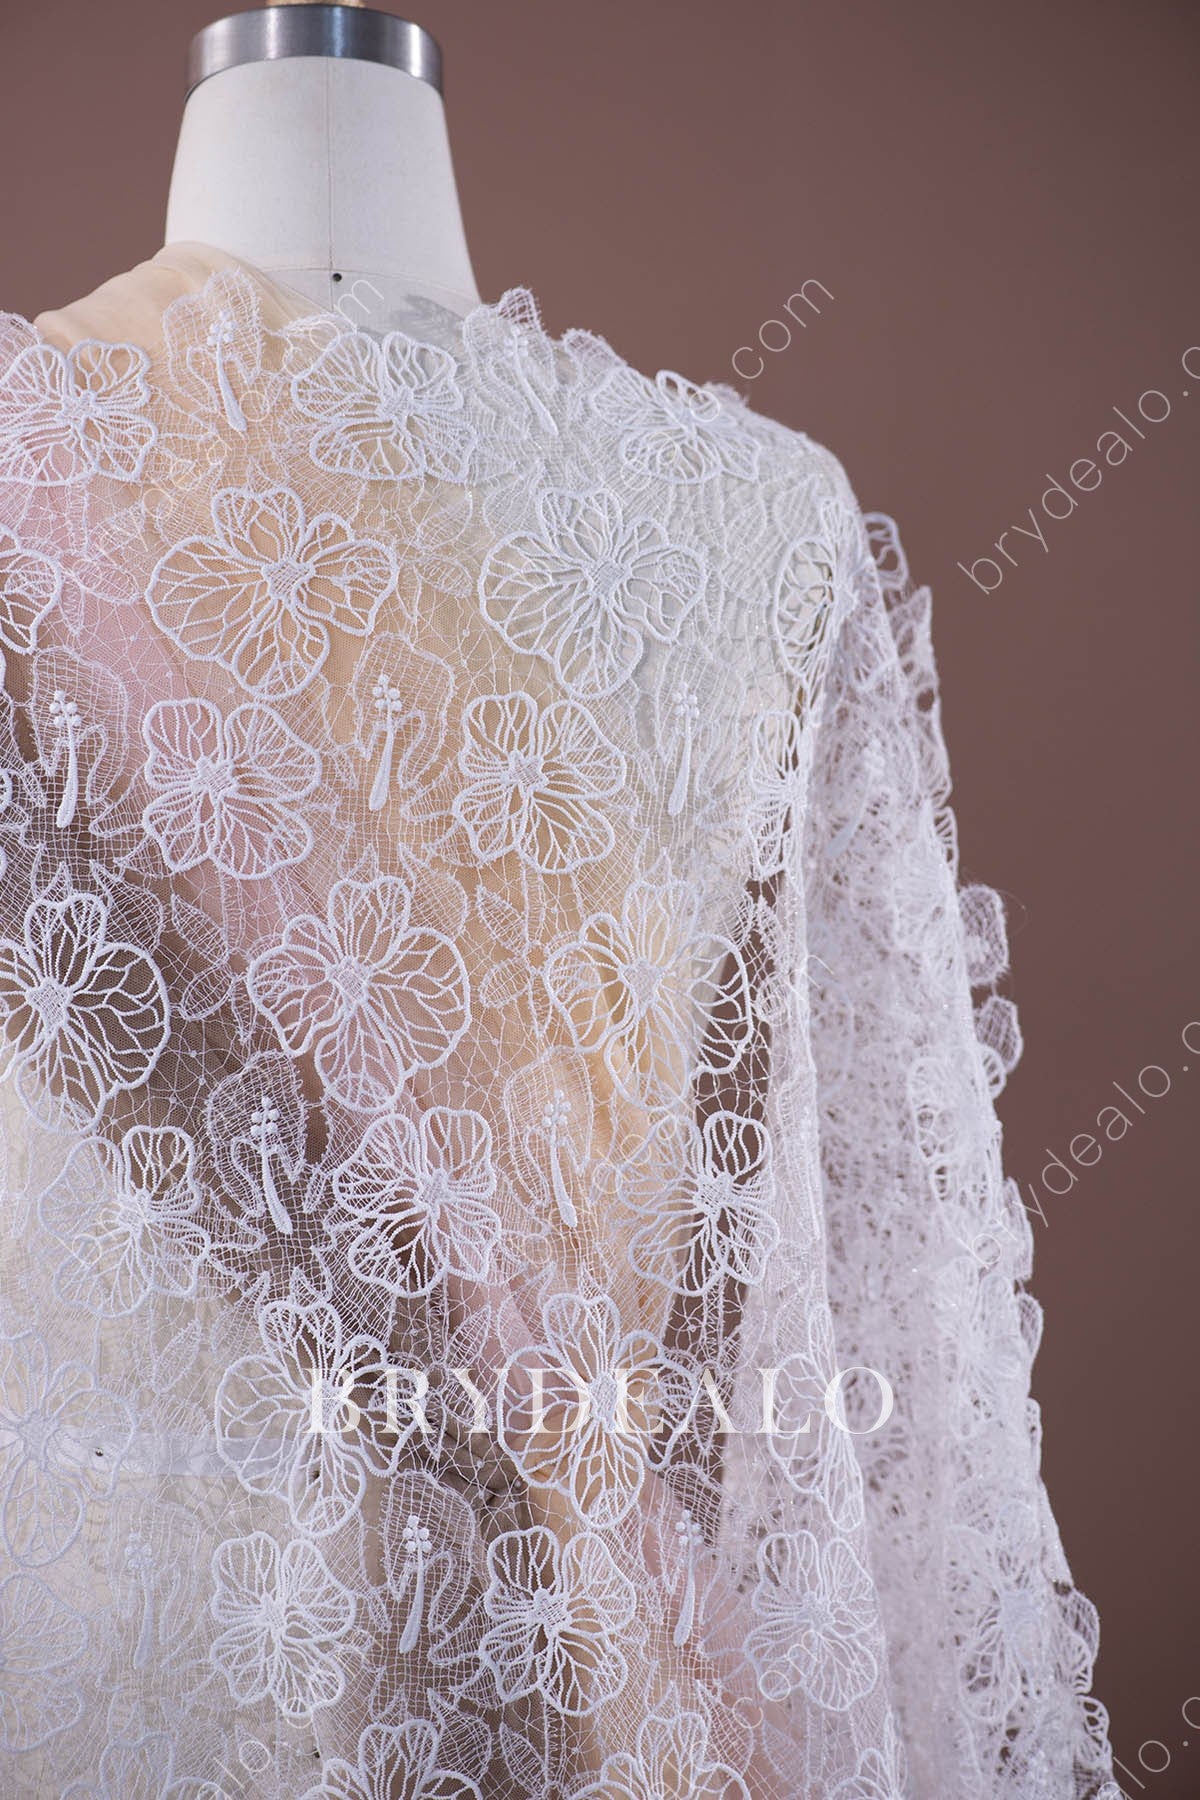 Wholesale Modern Big Flower Embroidered Lace Fabric Online